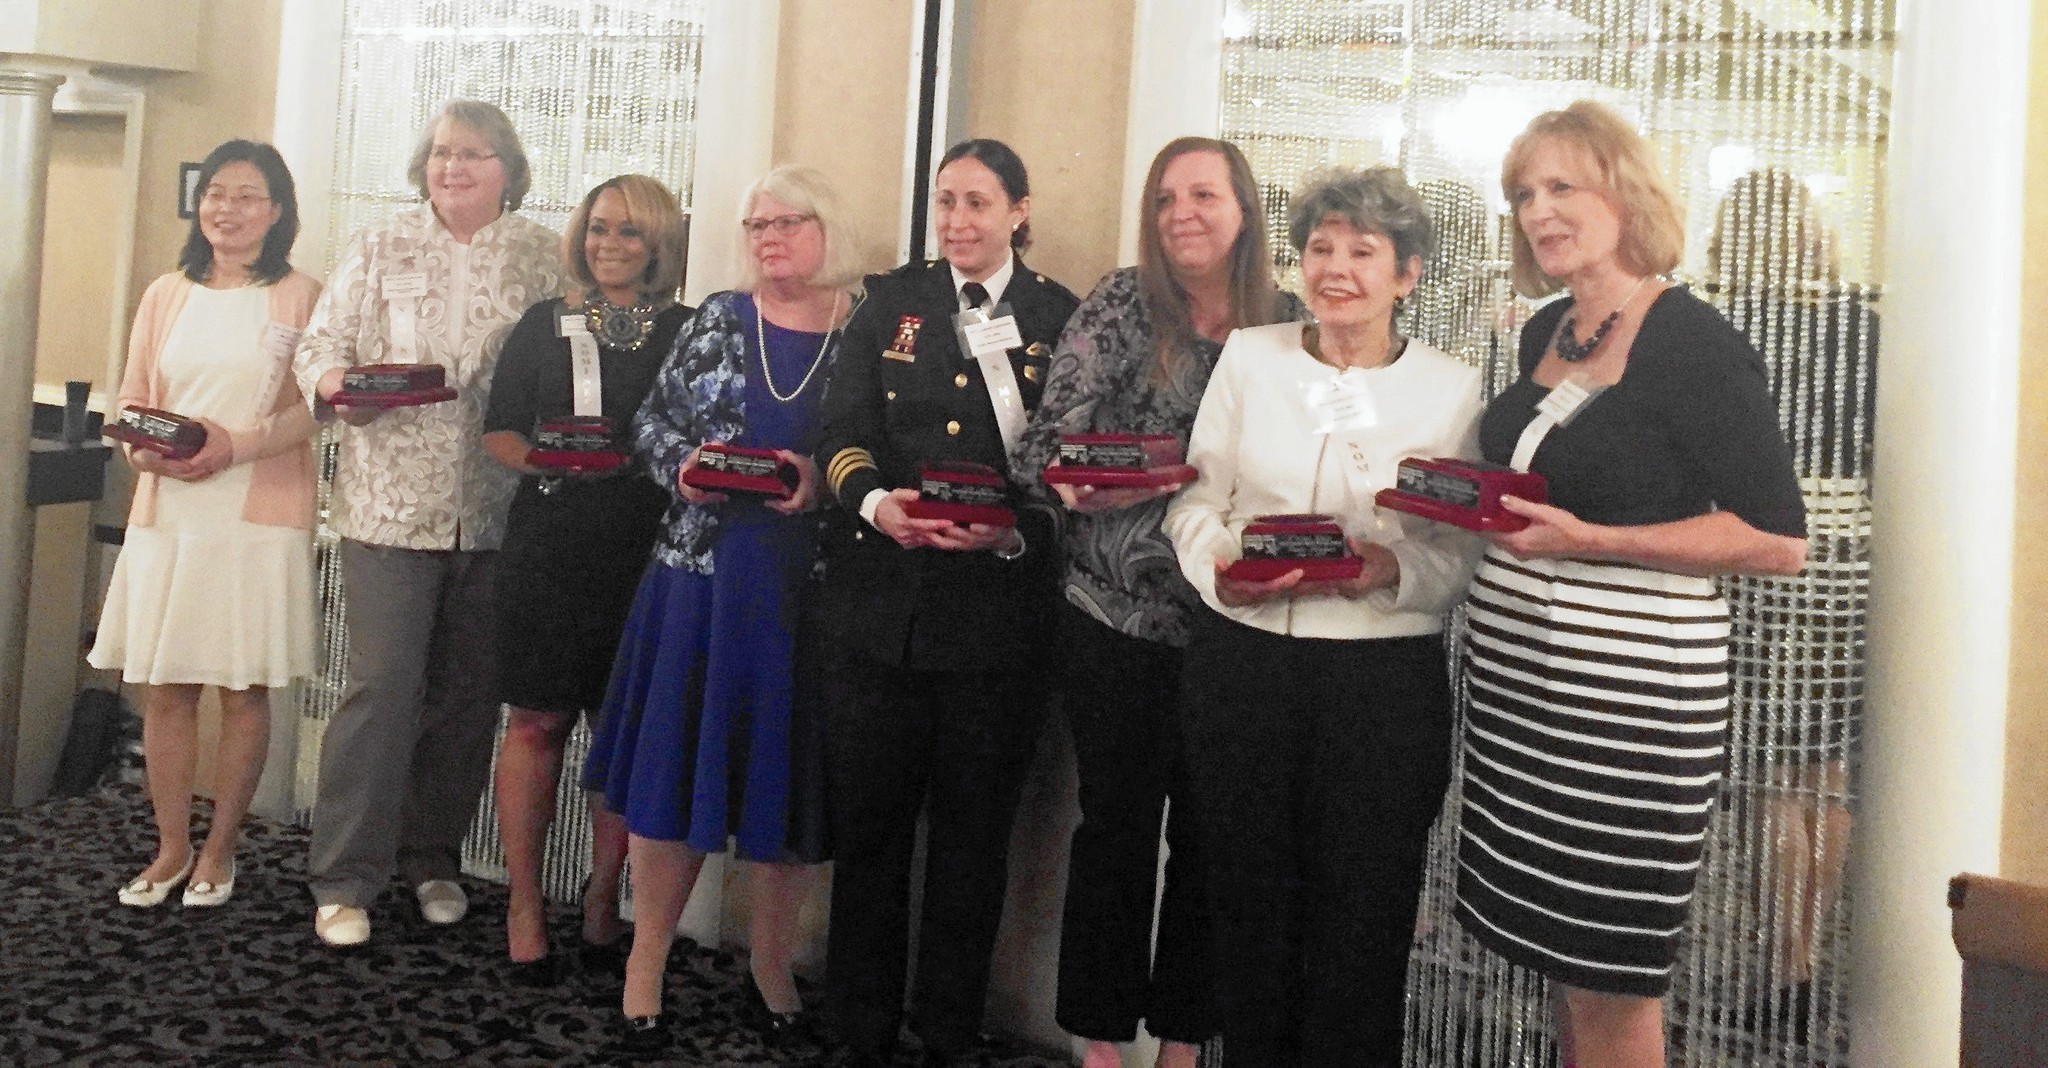 Women in Elgin community honored at Leader Luncheon - Elgin Courier-News